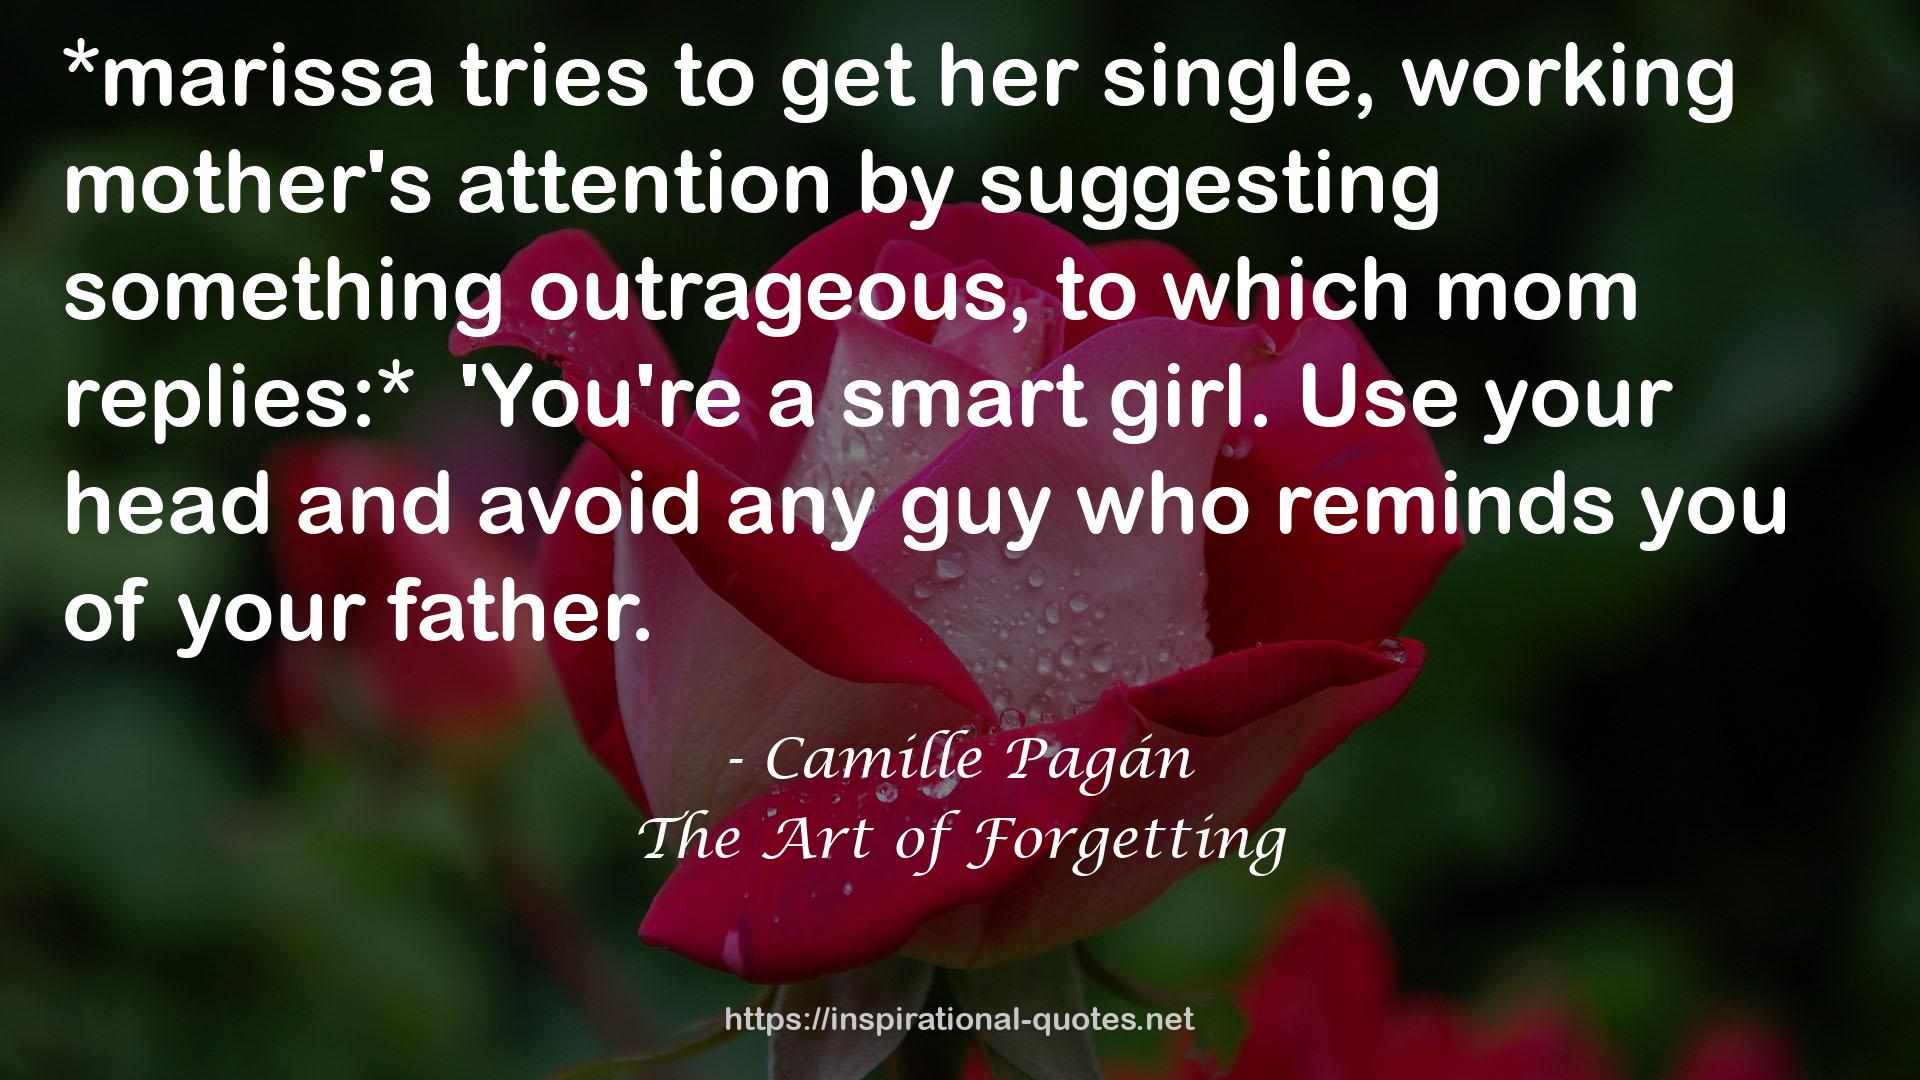 The Art of Forgetting QUOTES